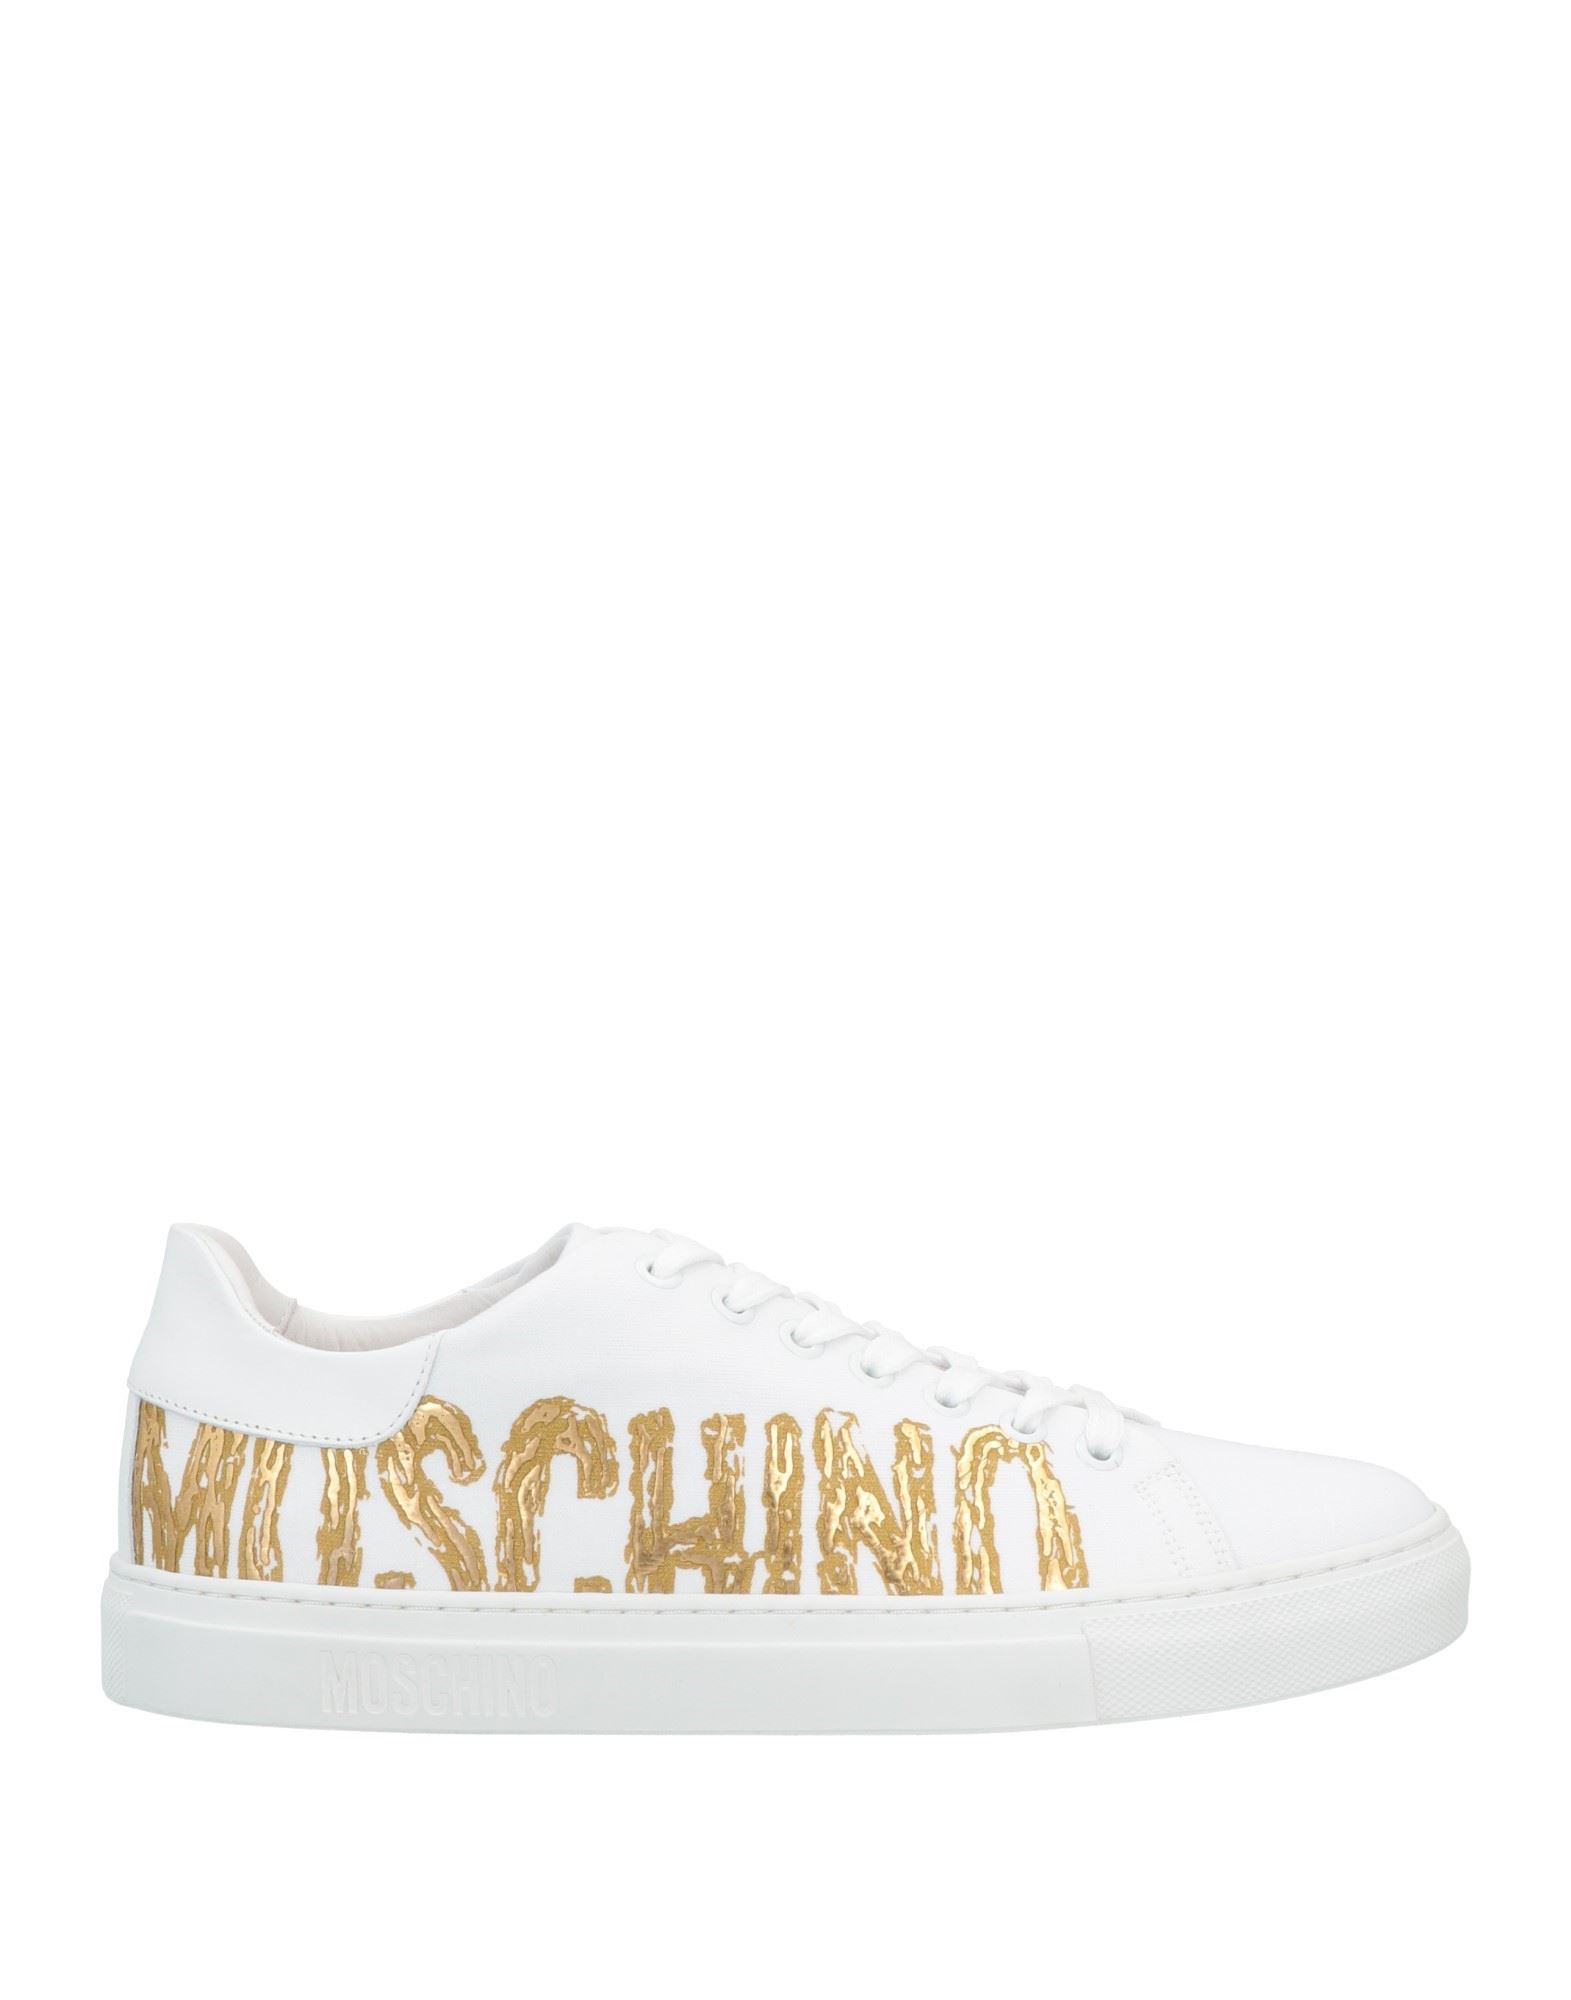 MOSCHINO MOSCHINO MAN SNEAKERS WHITE SIZE 9 SOFT LEATHER, TEXTILE FIBERS